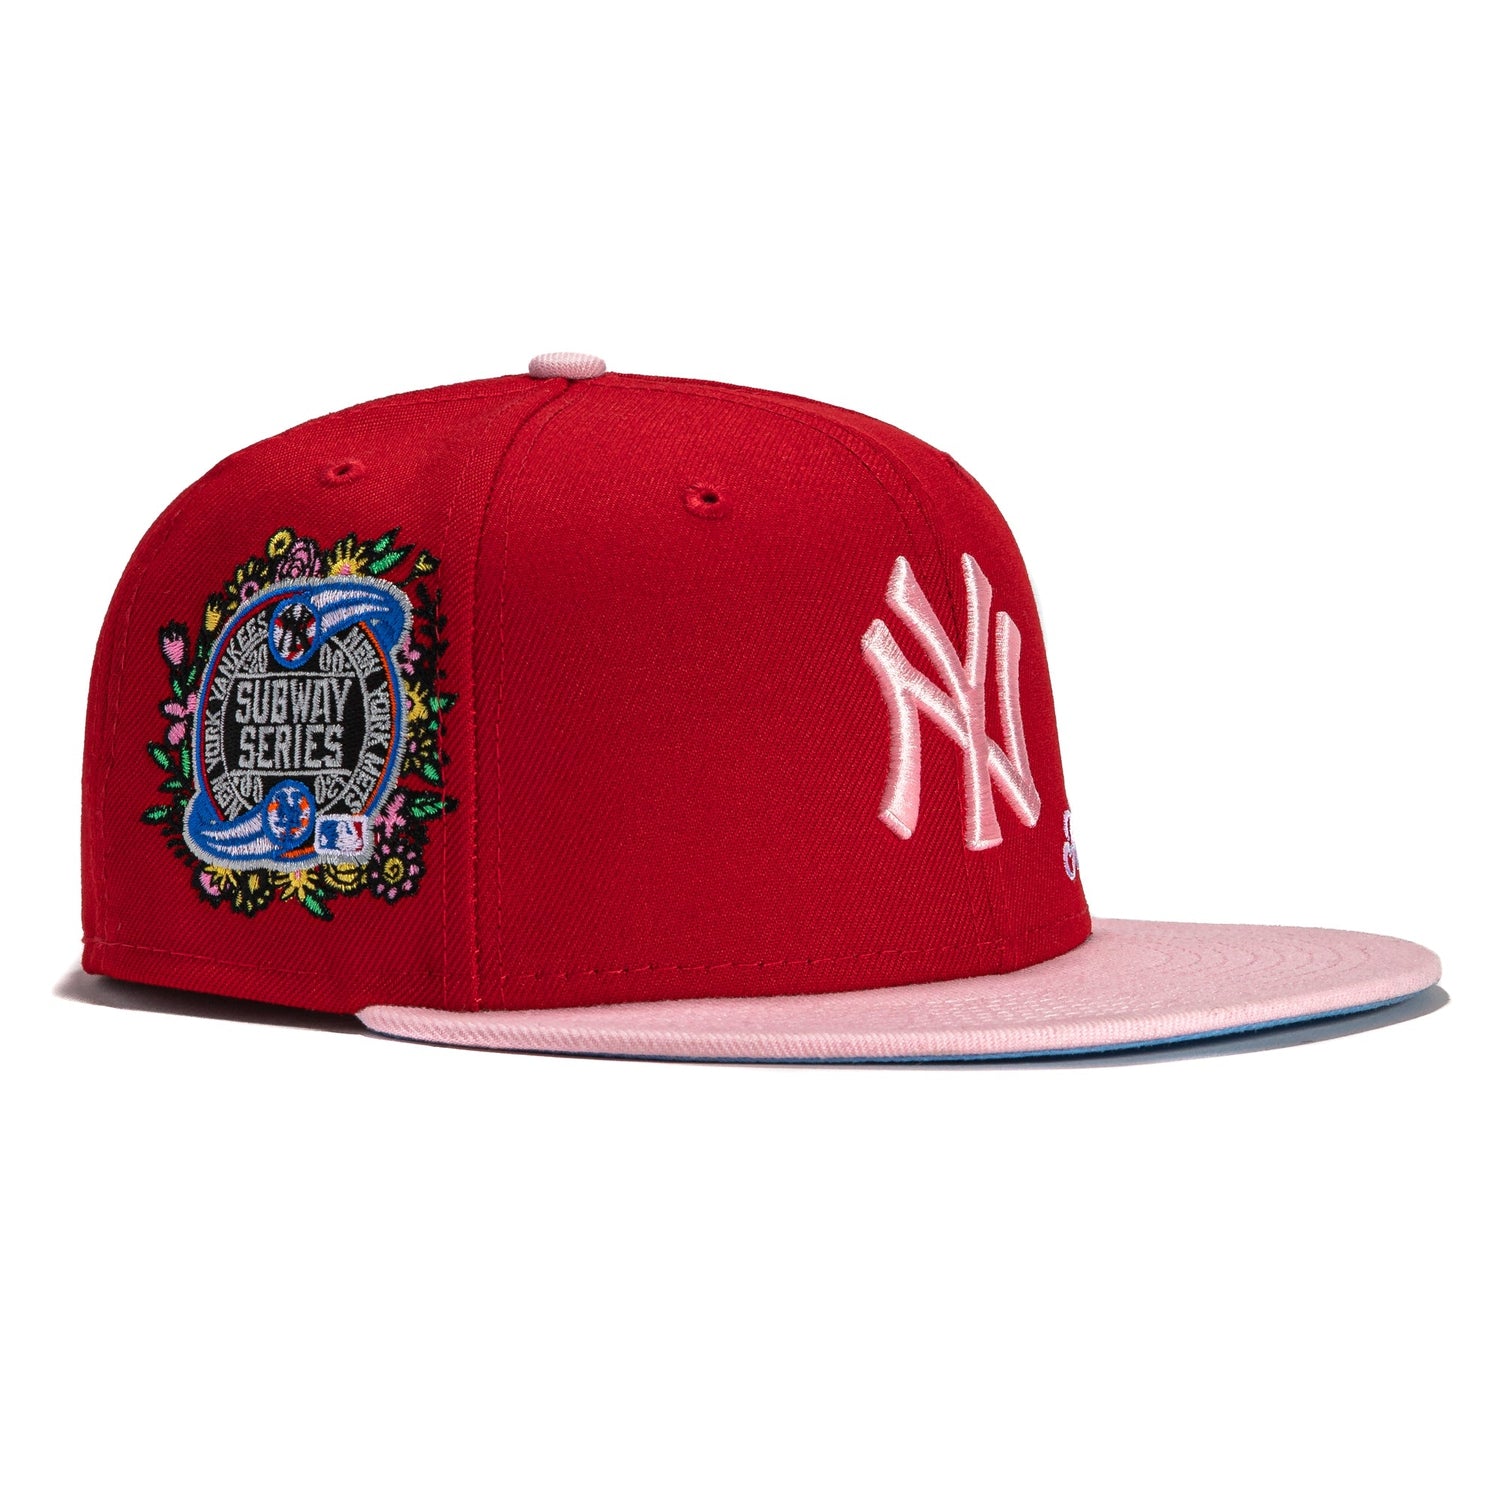 New Era 59FIFTY New York Yankees 2000 Subway Series Fitted Cap